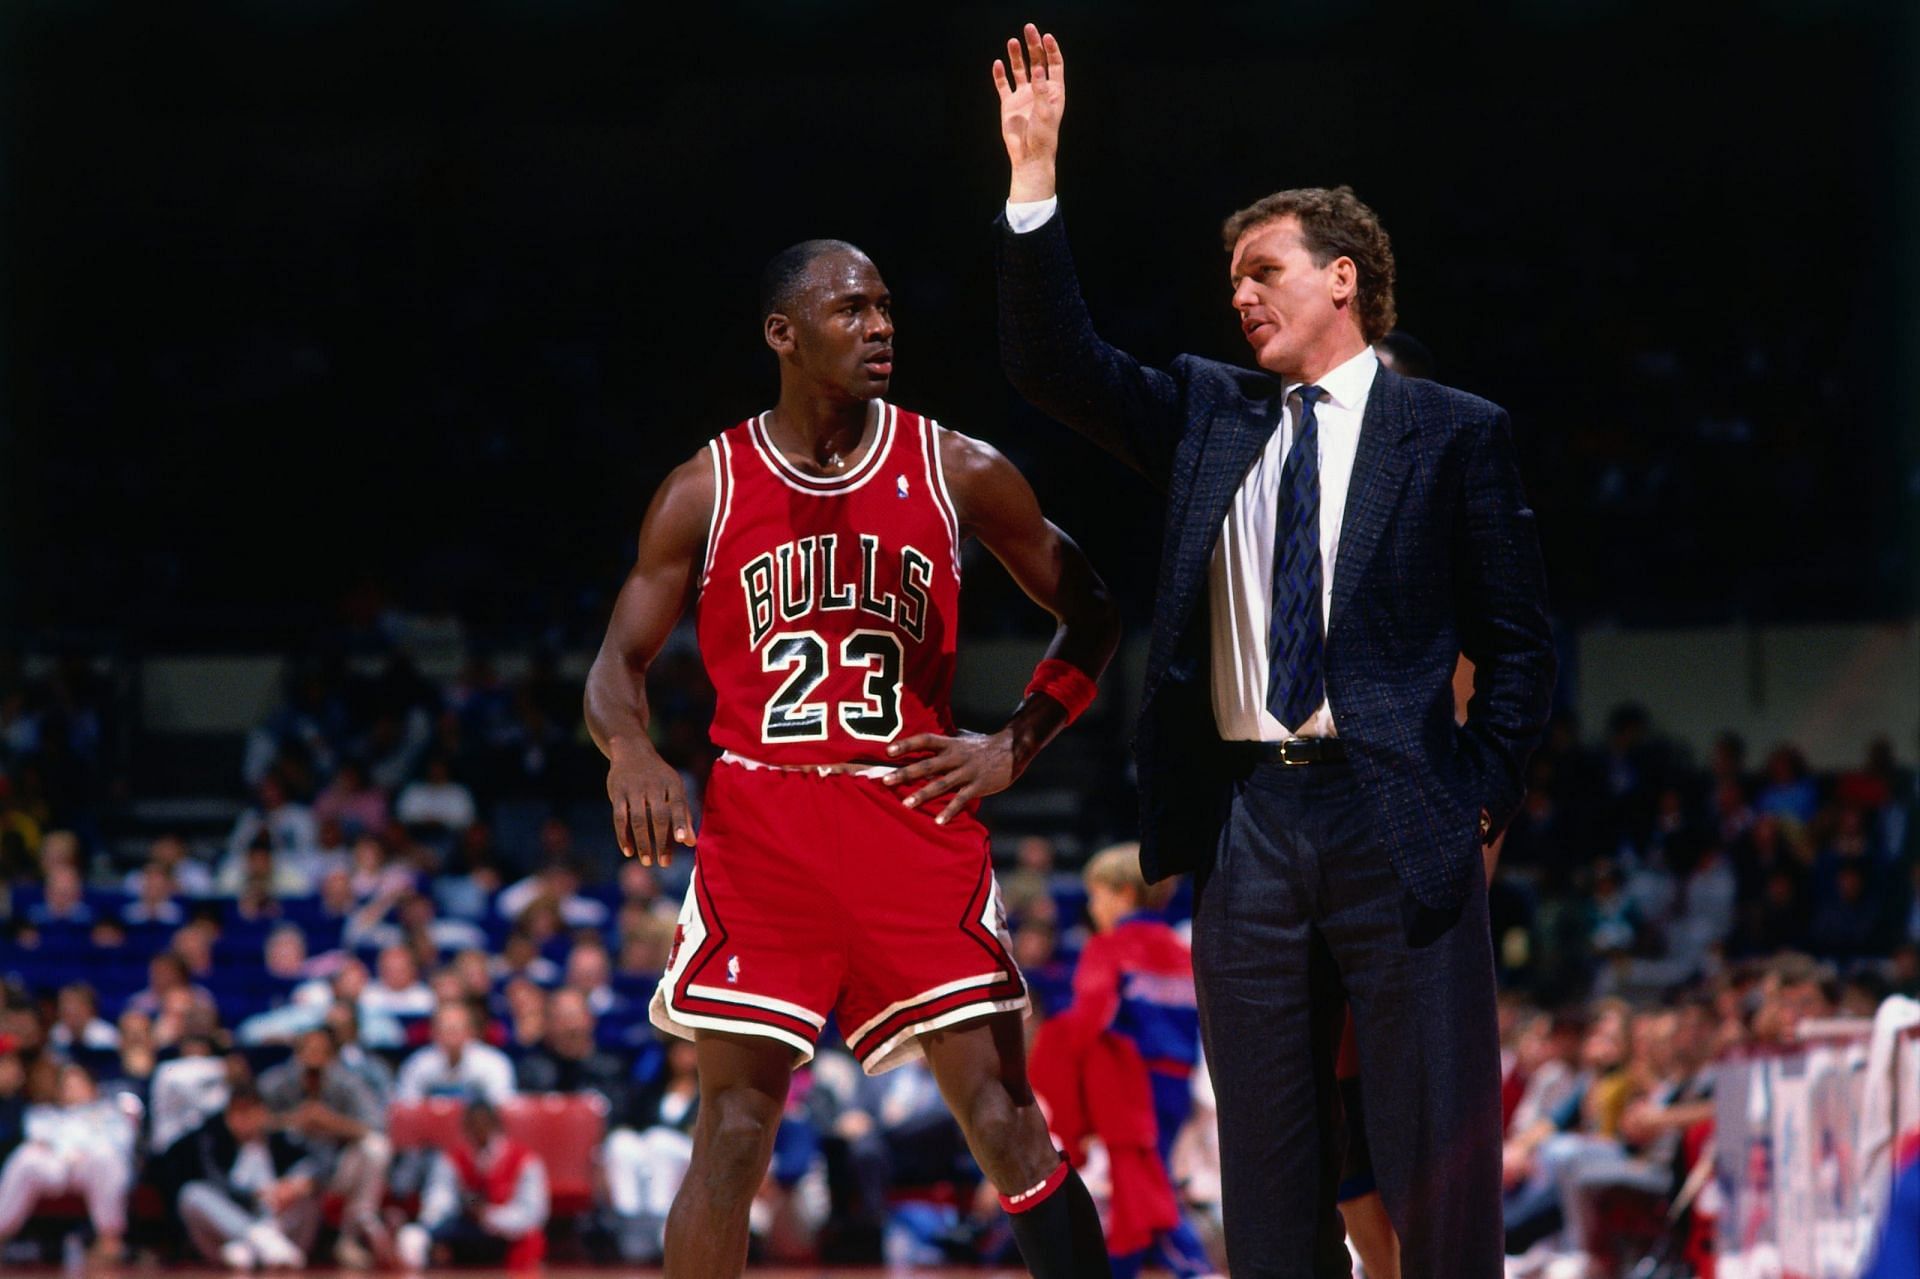 According to Michael Jordan&#039;s former coach, MJ&#039;s earlier playmaking would have shone more had the Bulls constructed a better roster comparable to the LA Lakers, Boston Celtics and Detroit Pistons. [Photo: Pippen Ain&#039;t Easy]